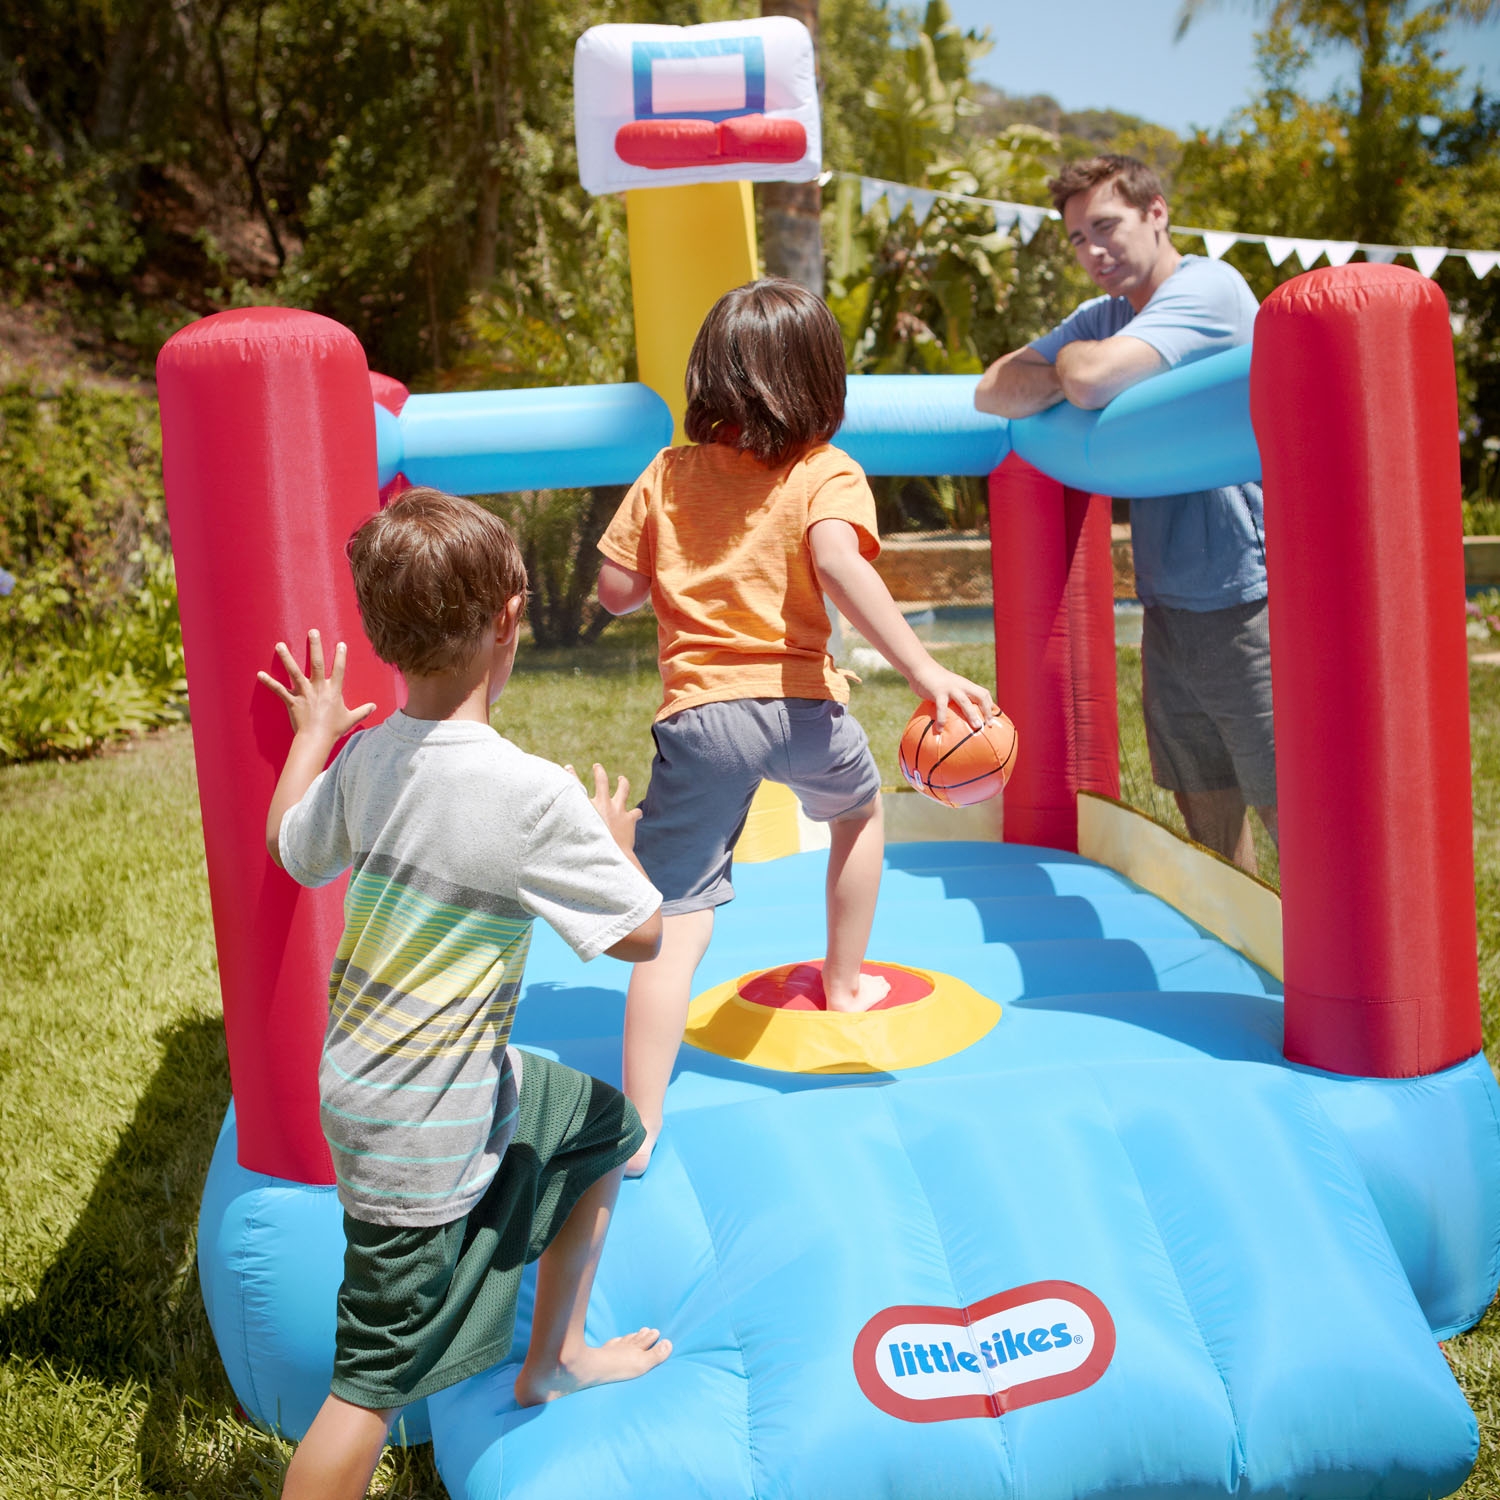 Little Tikes Super Slam 'N Dunk Inflatable Sports Bouncer with Inflatable Basketball Hoop & Blower, Multicolor, Outdoor Toy Kids Girls Boys Ages 3 4 5+ - image 3 of 6